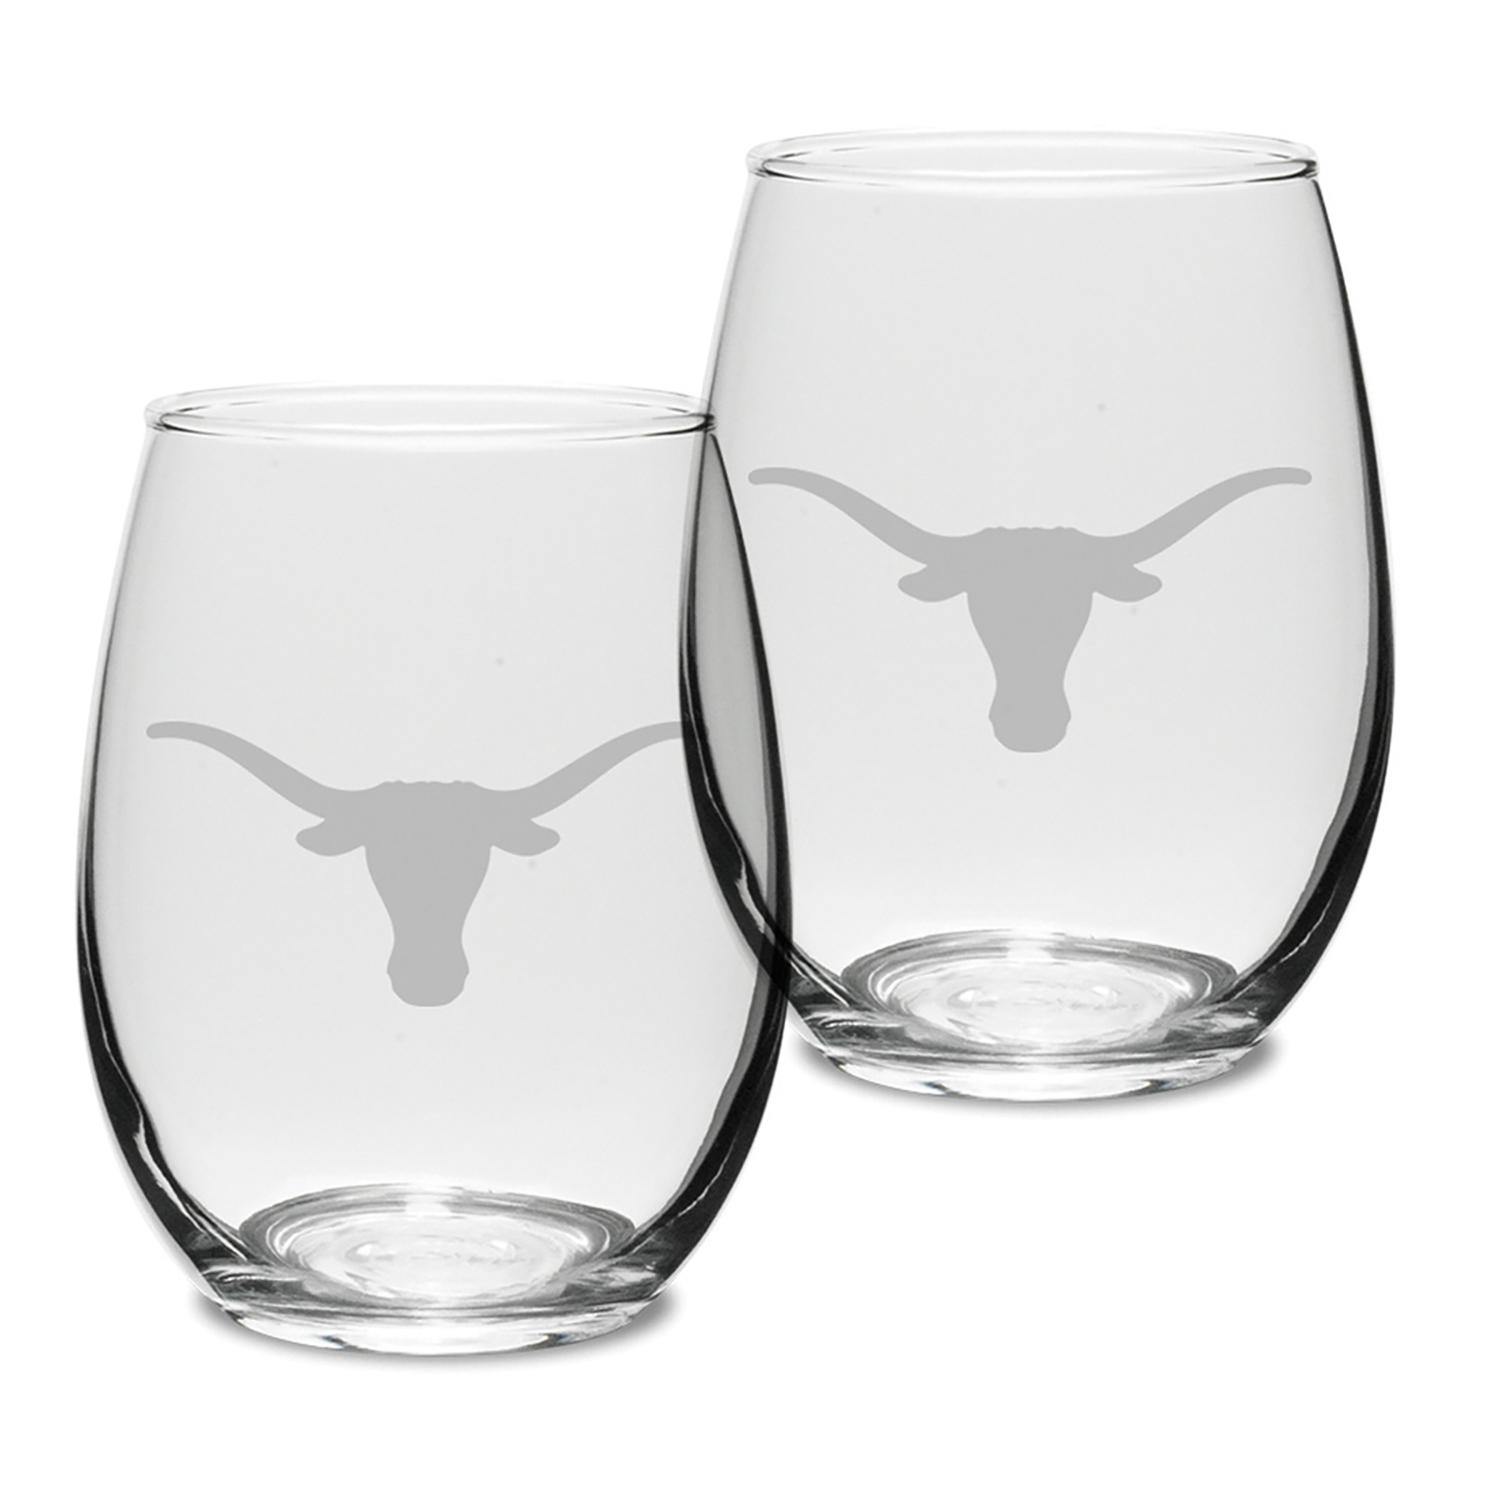 Wine glasses with etched UT longhorn